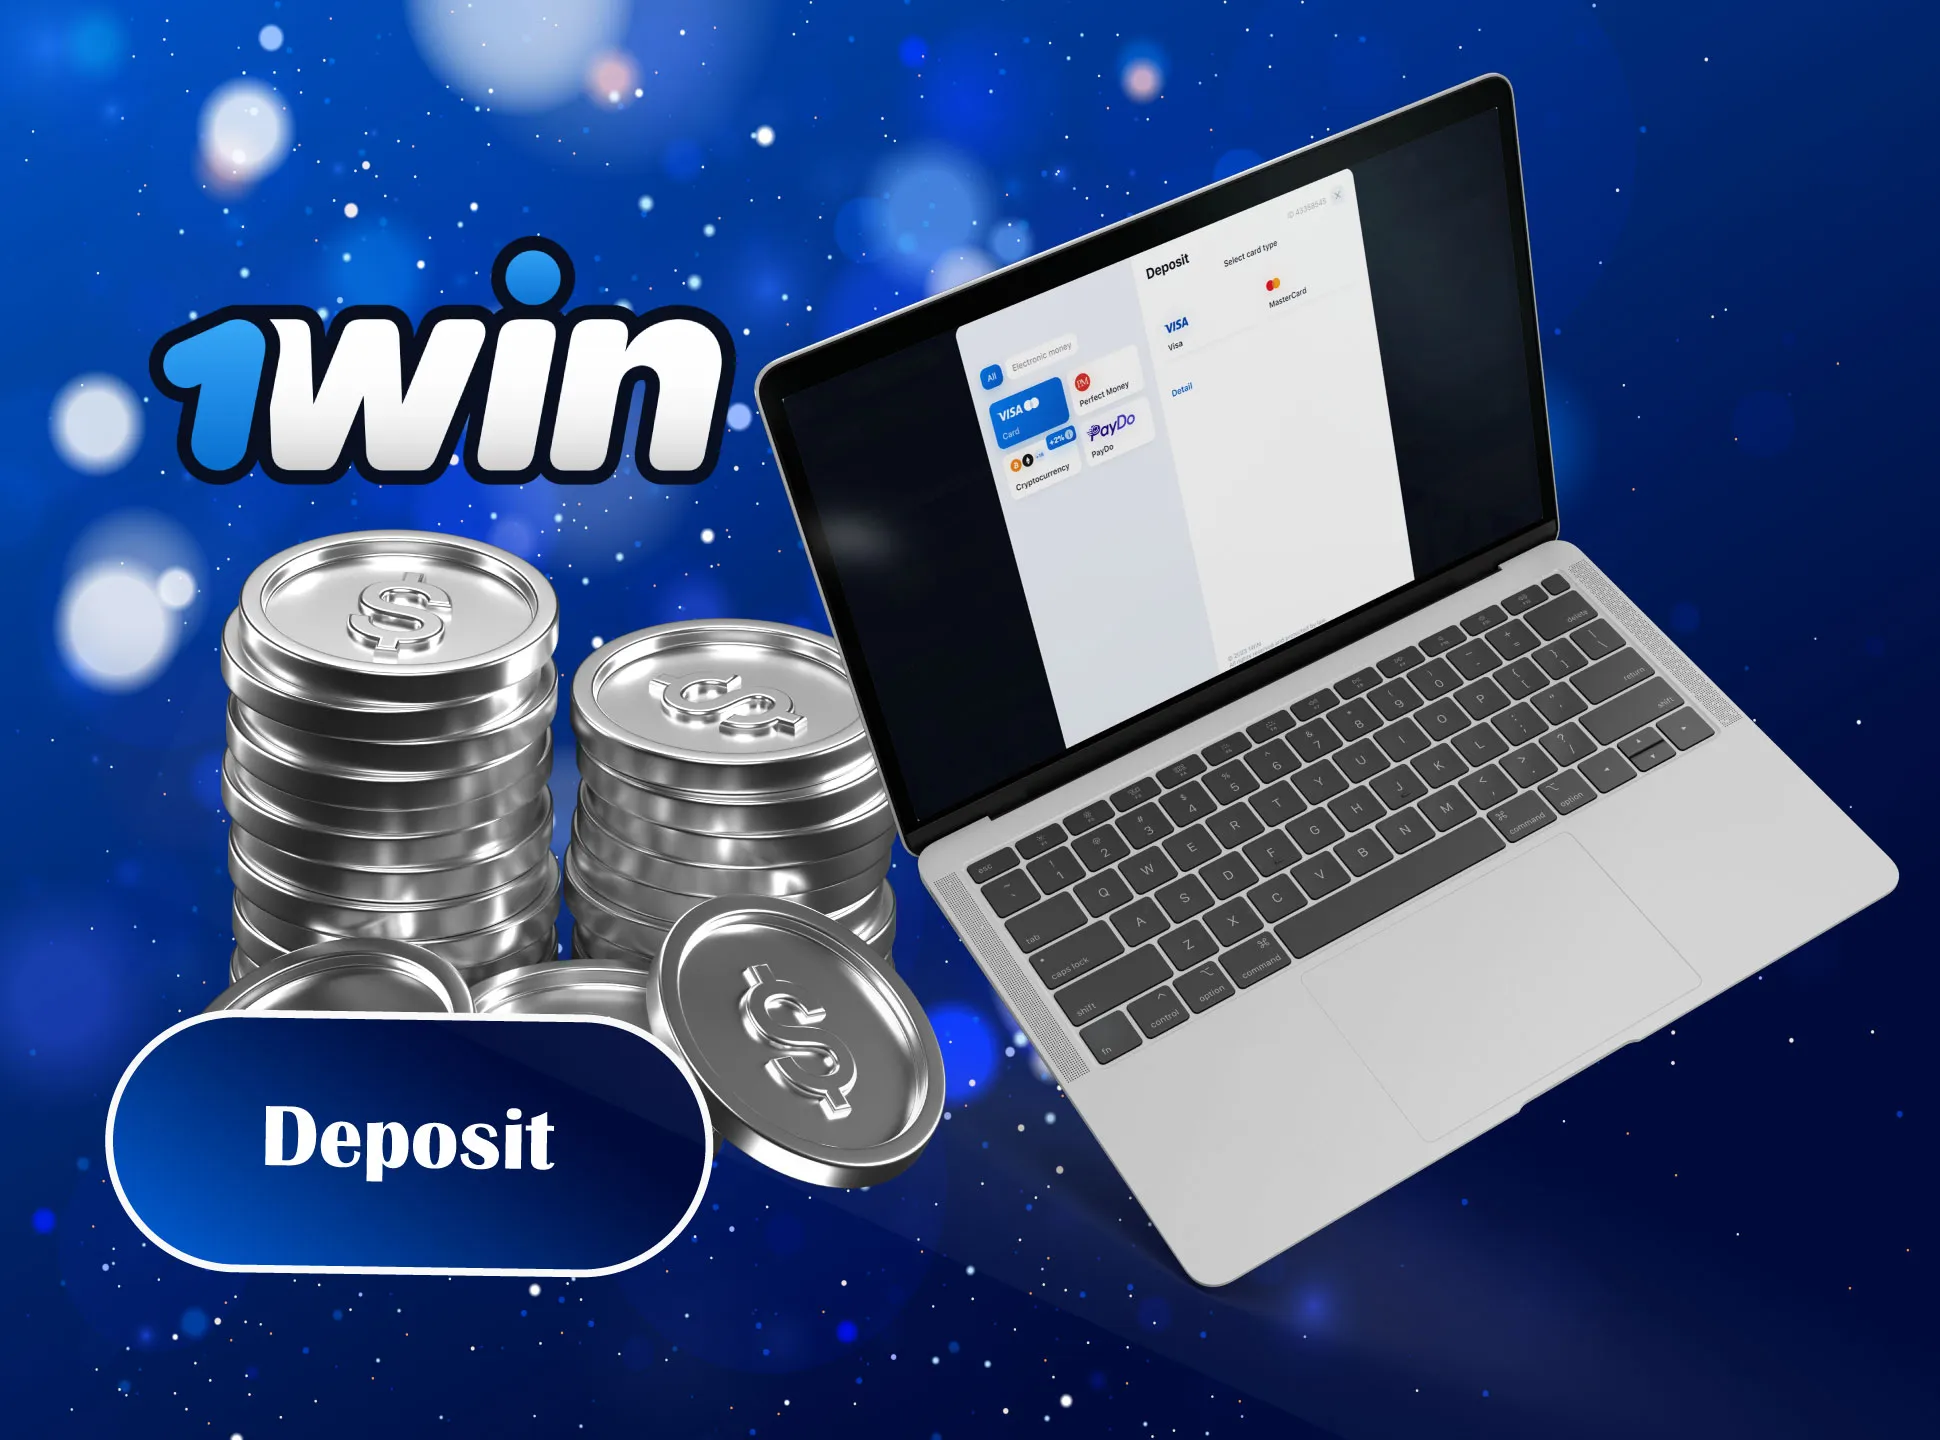 Log in to your account and make a deposit to start betting.